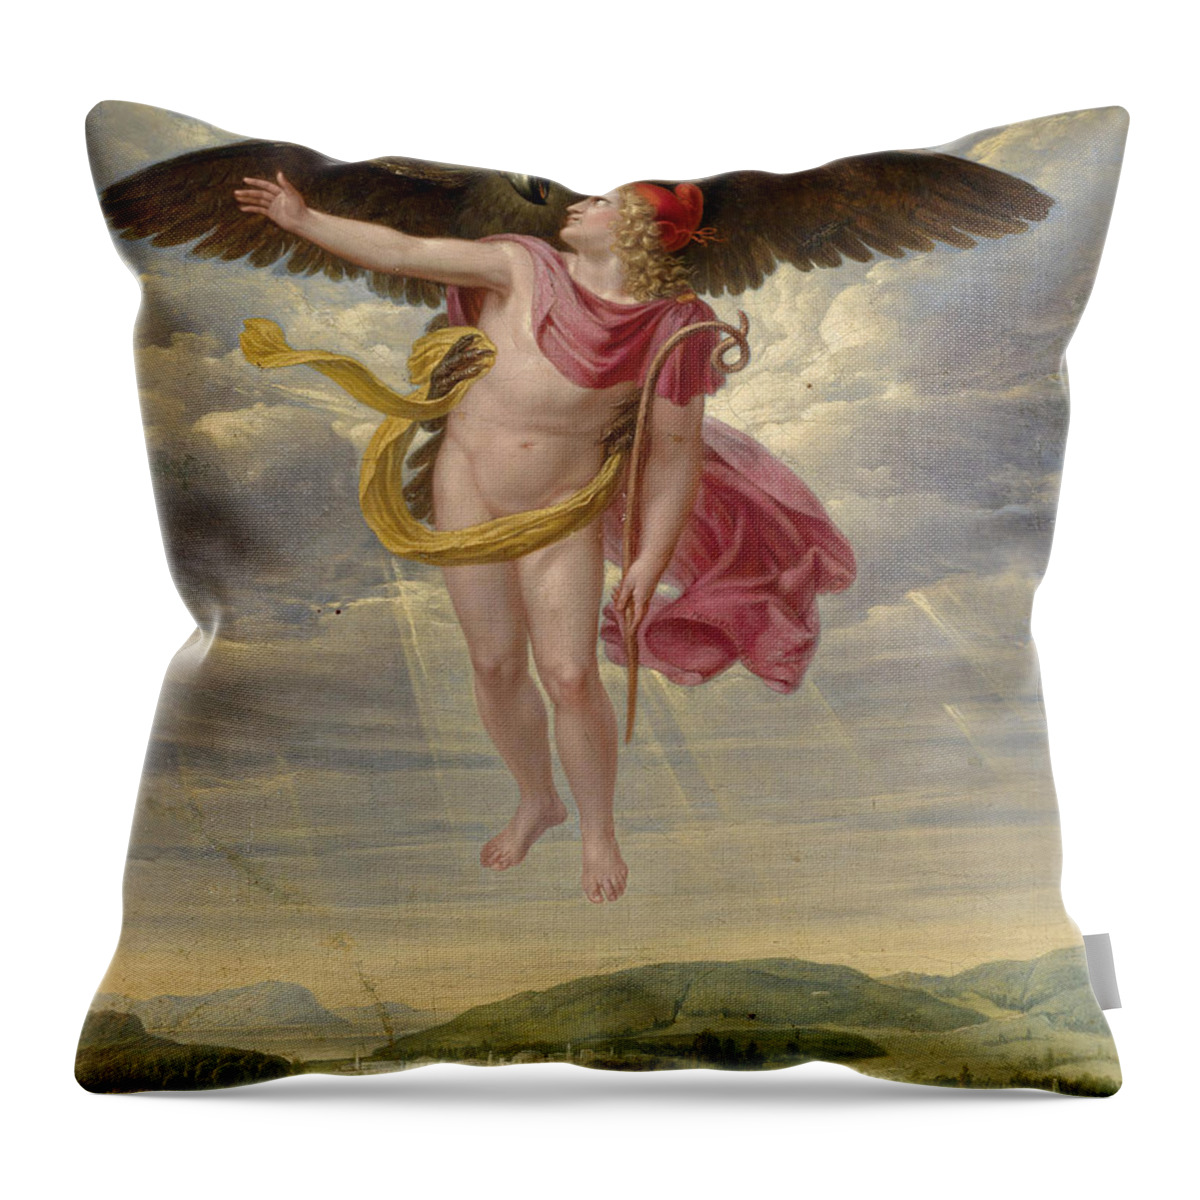 Sigmund Ferdinand Von Perger Throw Pillow featuring the painting The Abduction of Ganymede by Sigmund Ferdinand von Perger